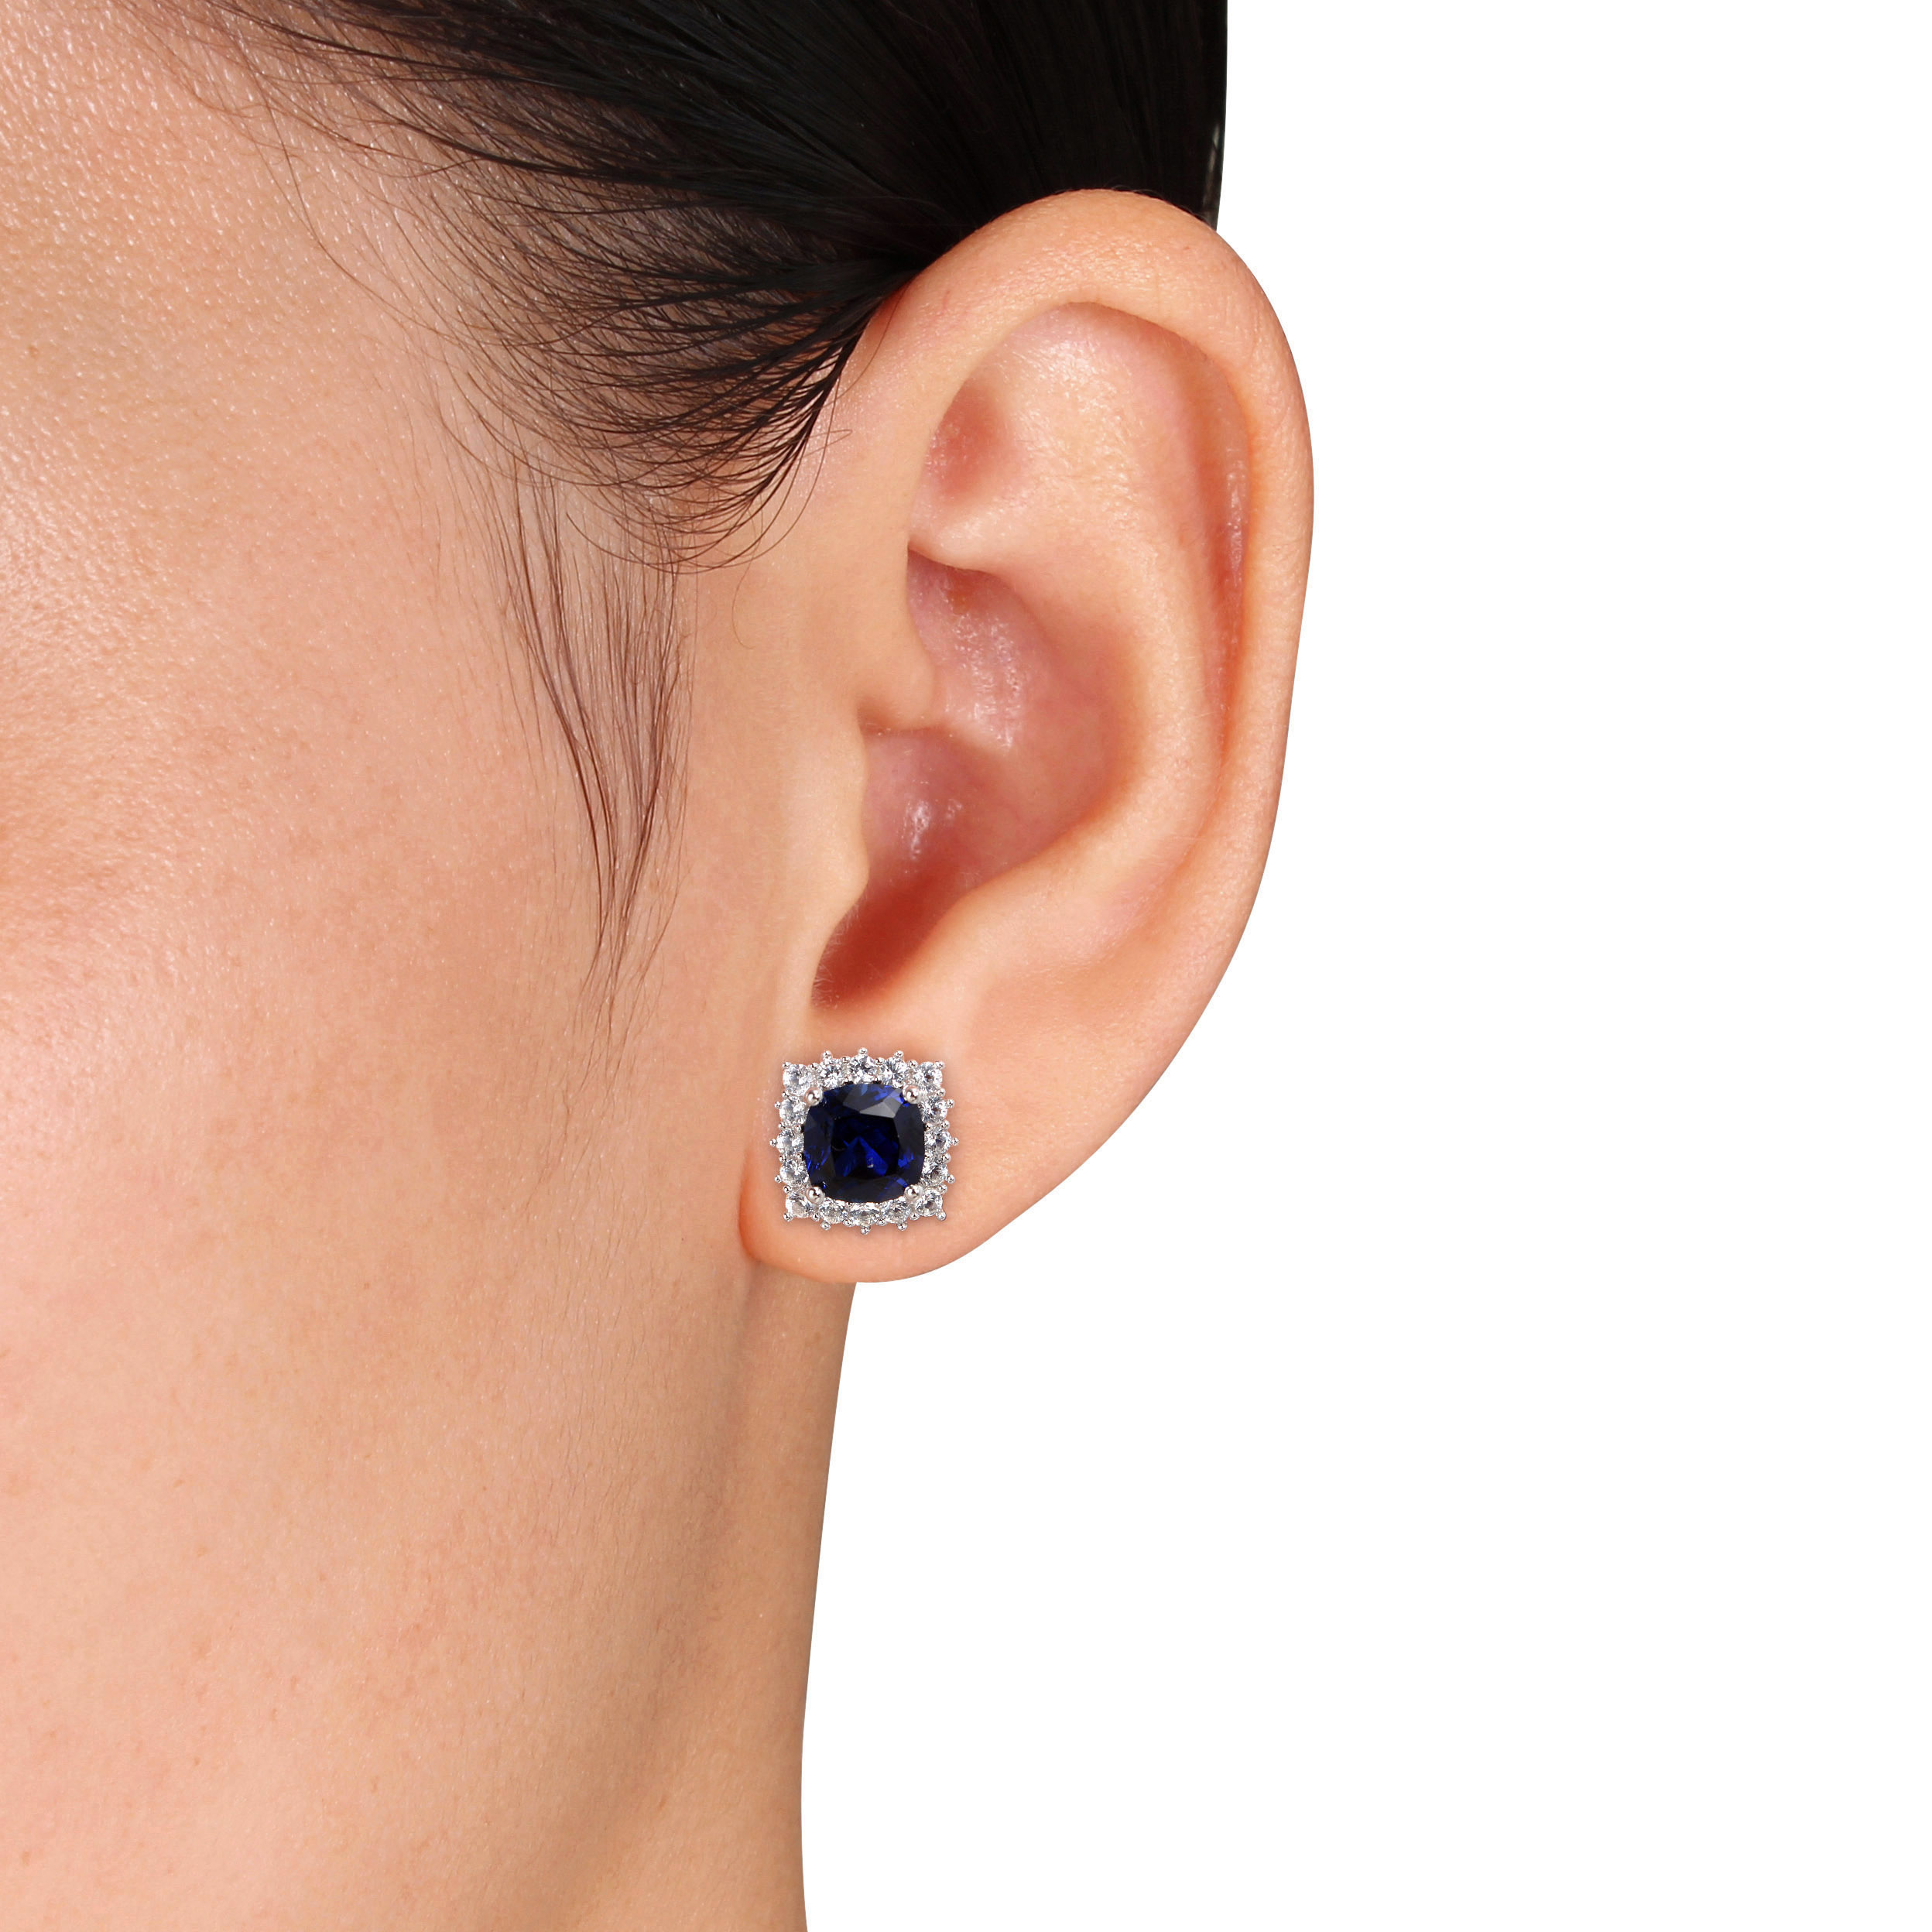 4 7/8 CT TGW Created Blue and White Sapphire Stud Earrings in Sterling Silver